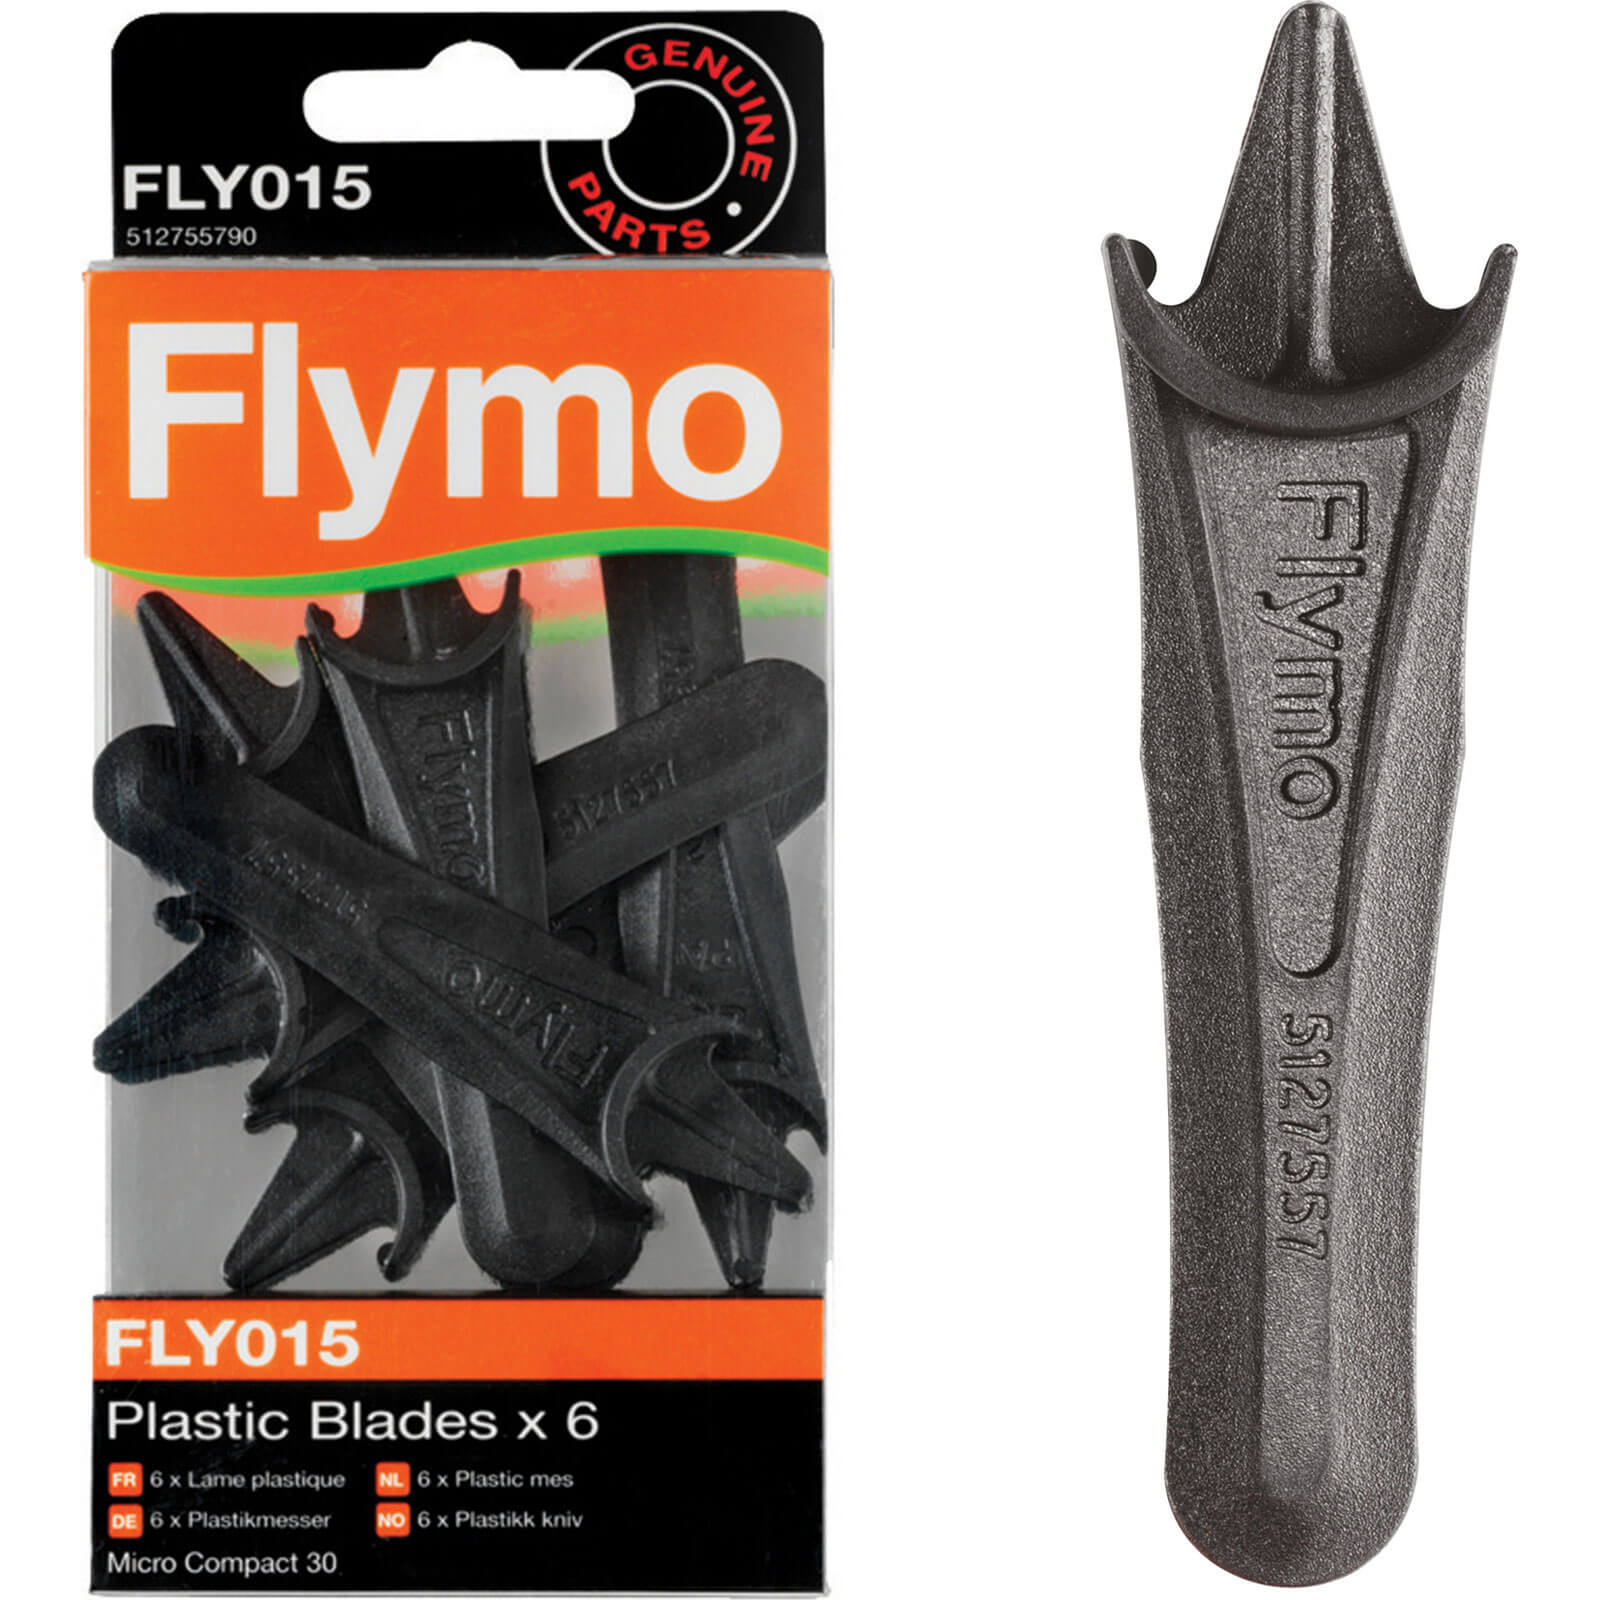 Image of Flymo FLY015 Genuine Blades for Micro Compact Lawnmowers Pack of 6